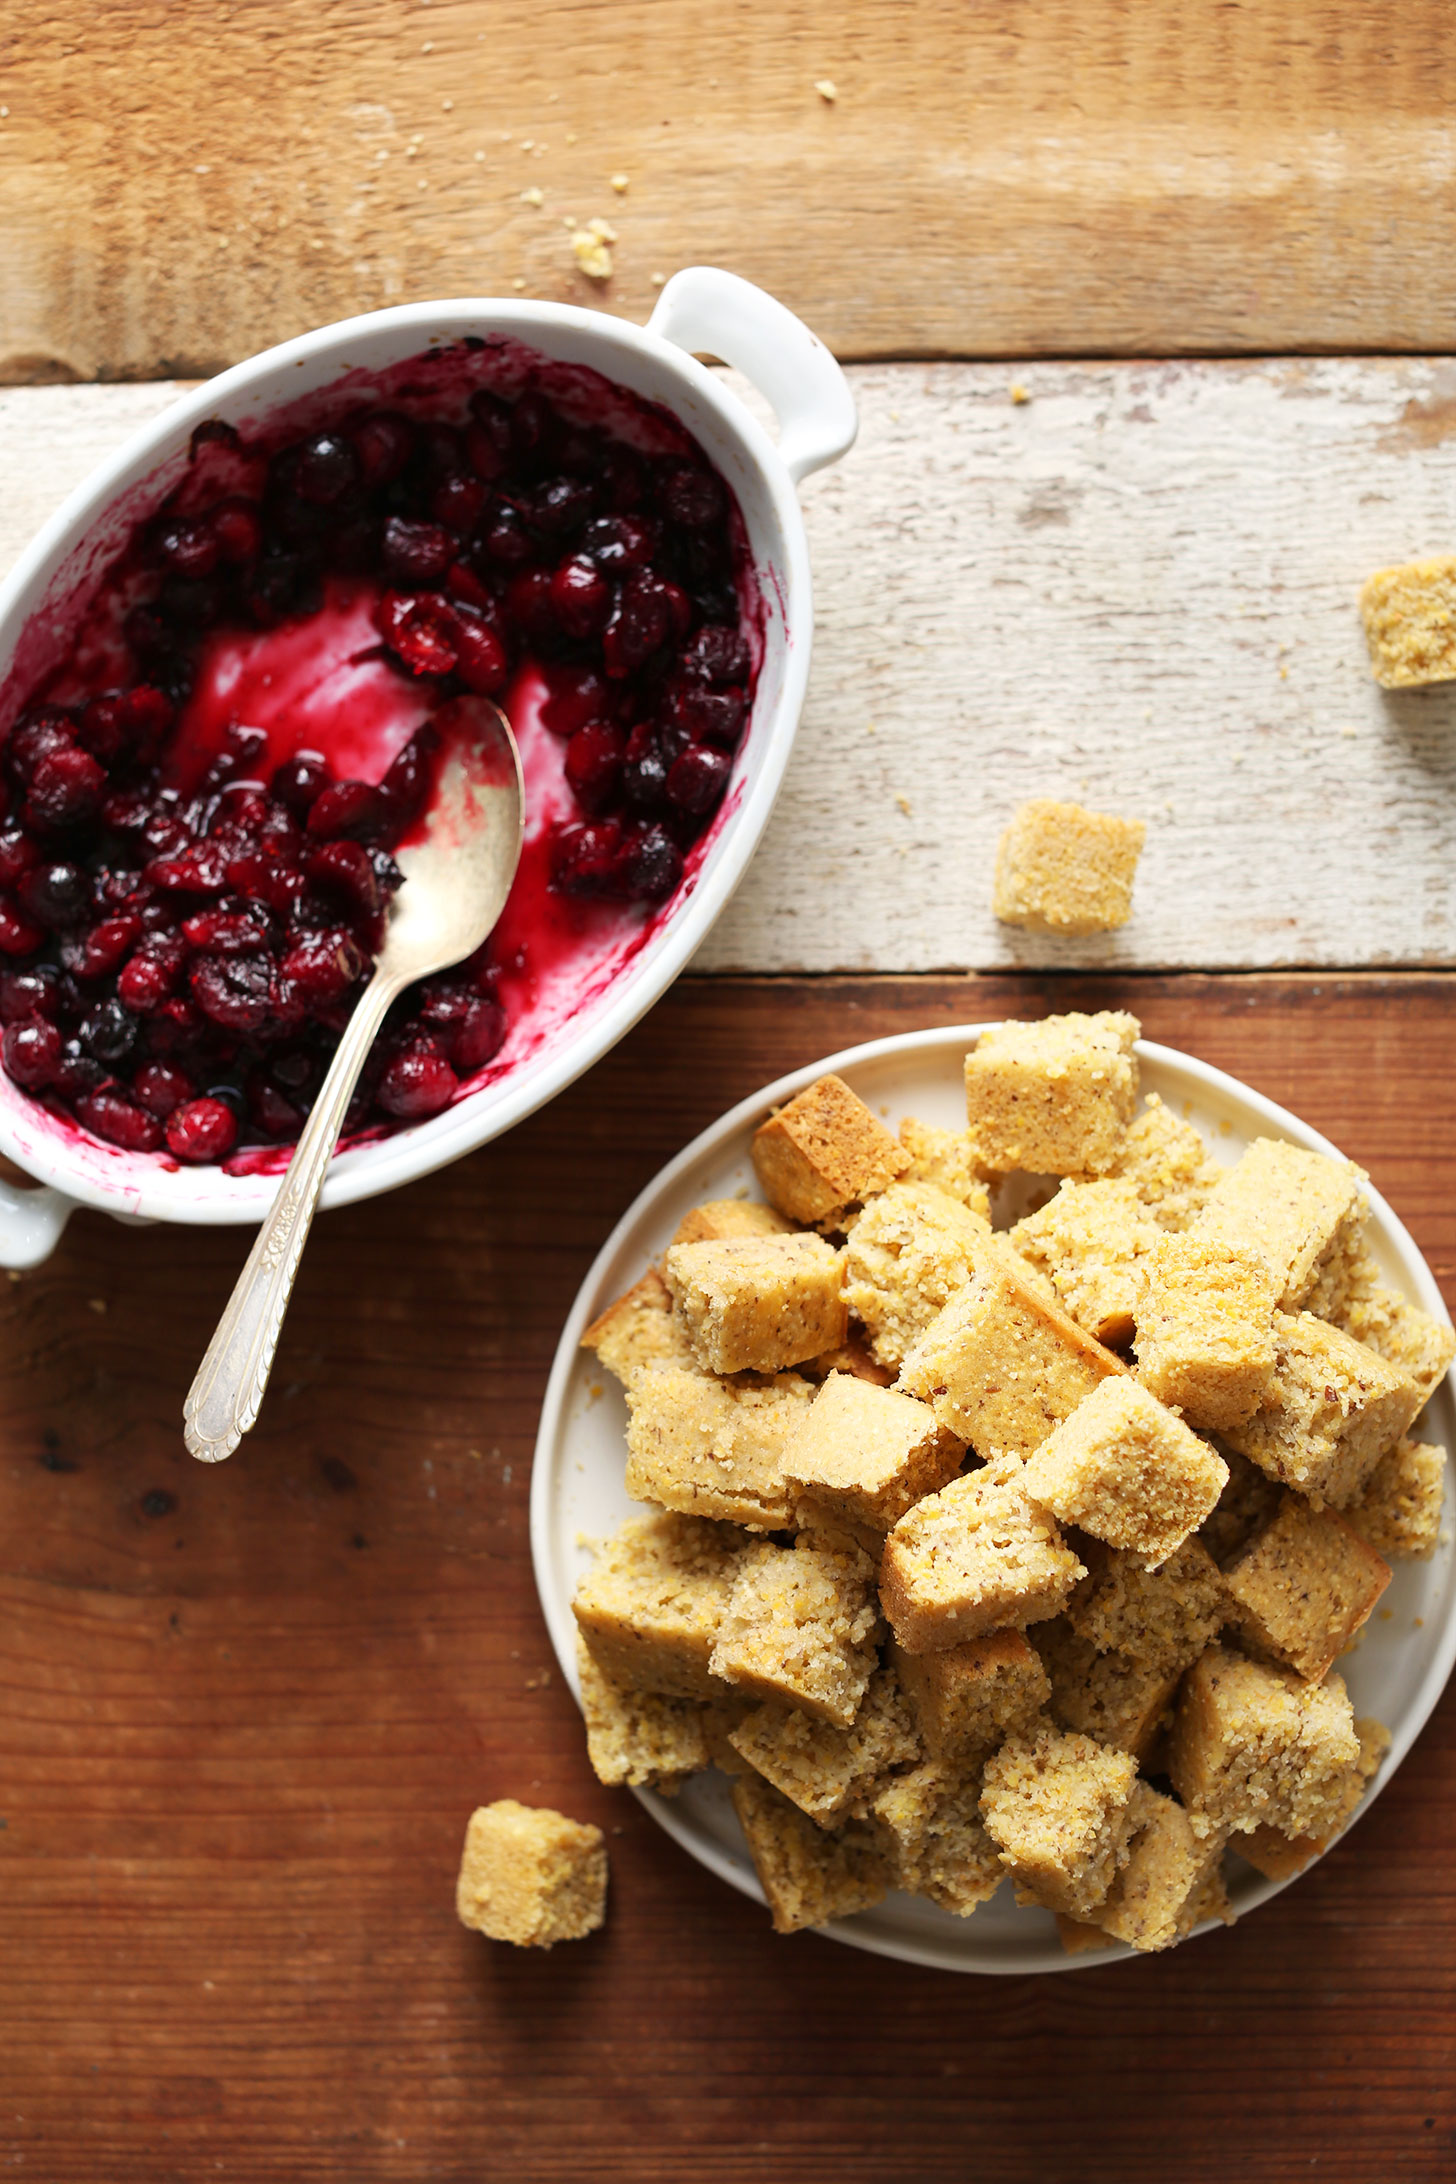 Plate of cubed vegan gluten-free cornbread and a bowl of cooked cranberries for making healthy Thanksgiving stuffing